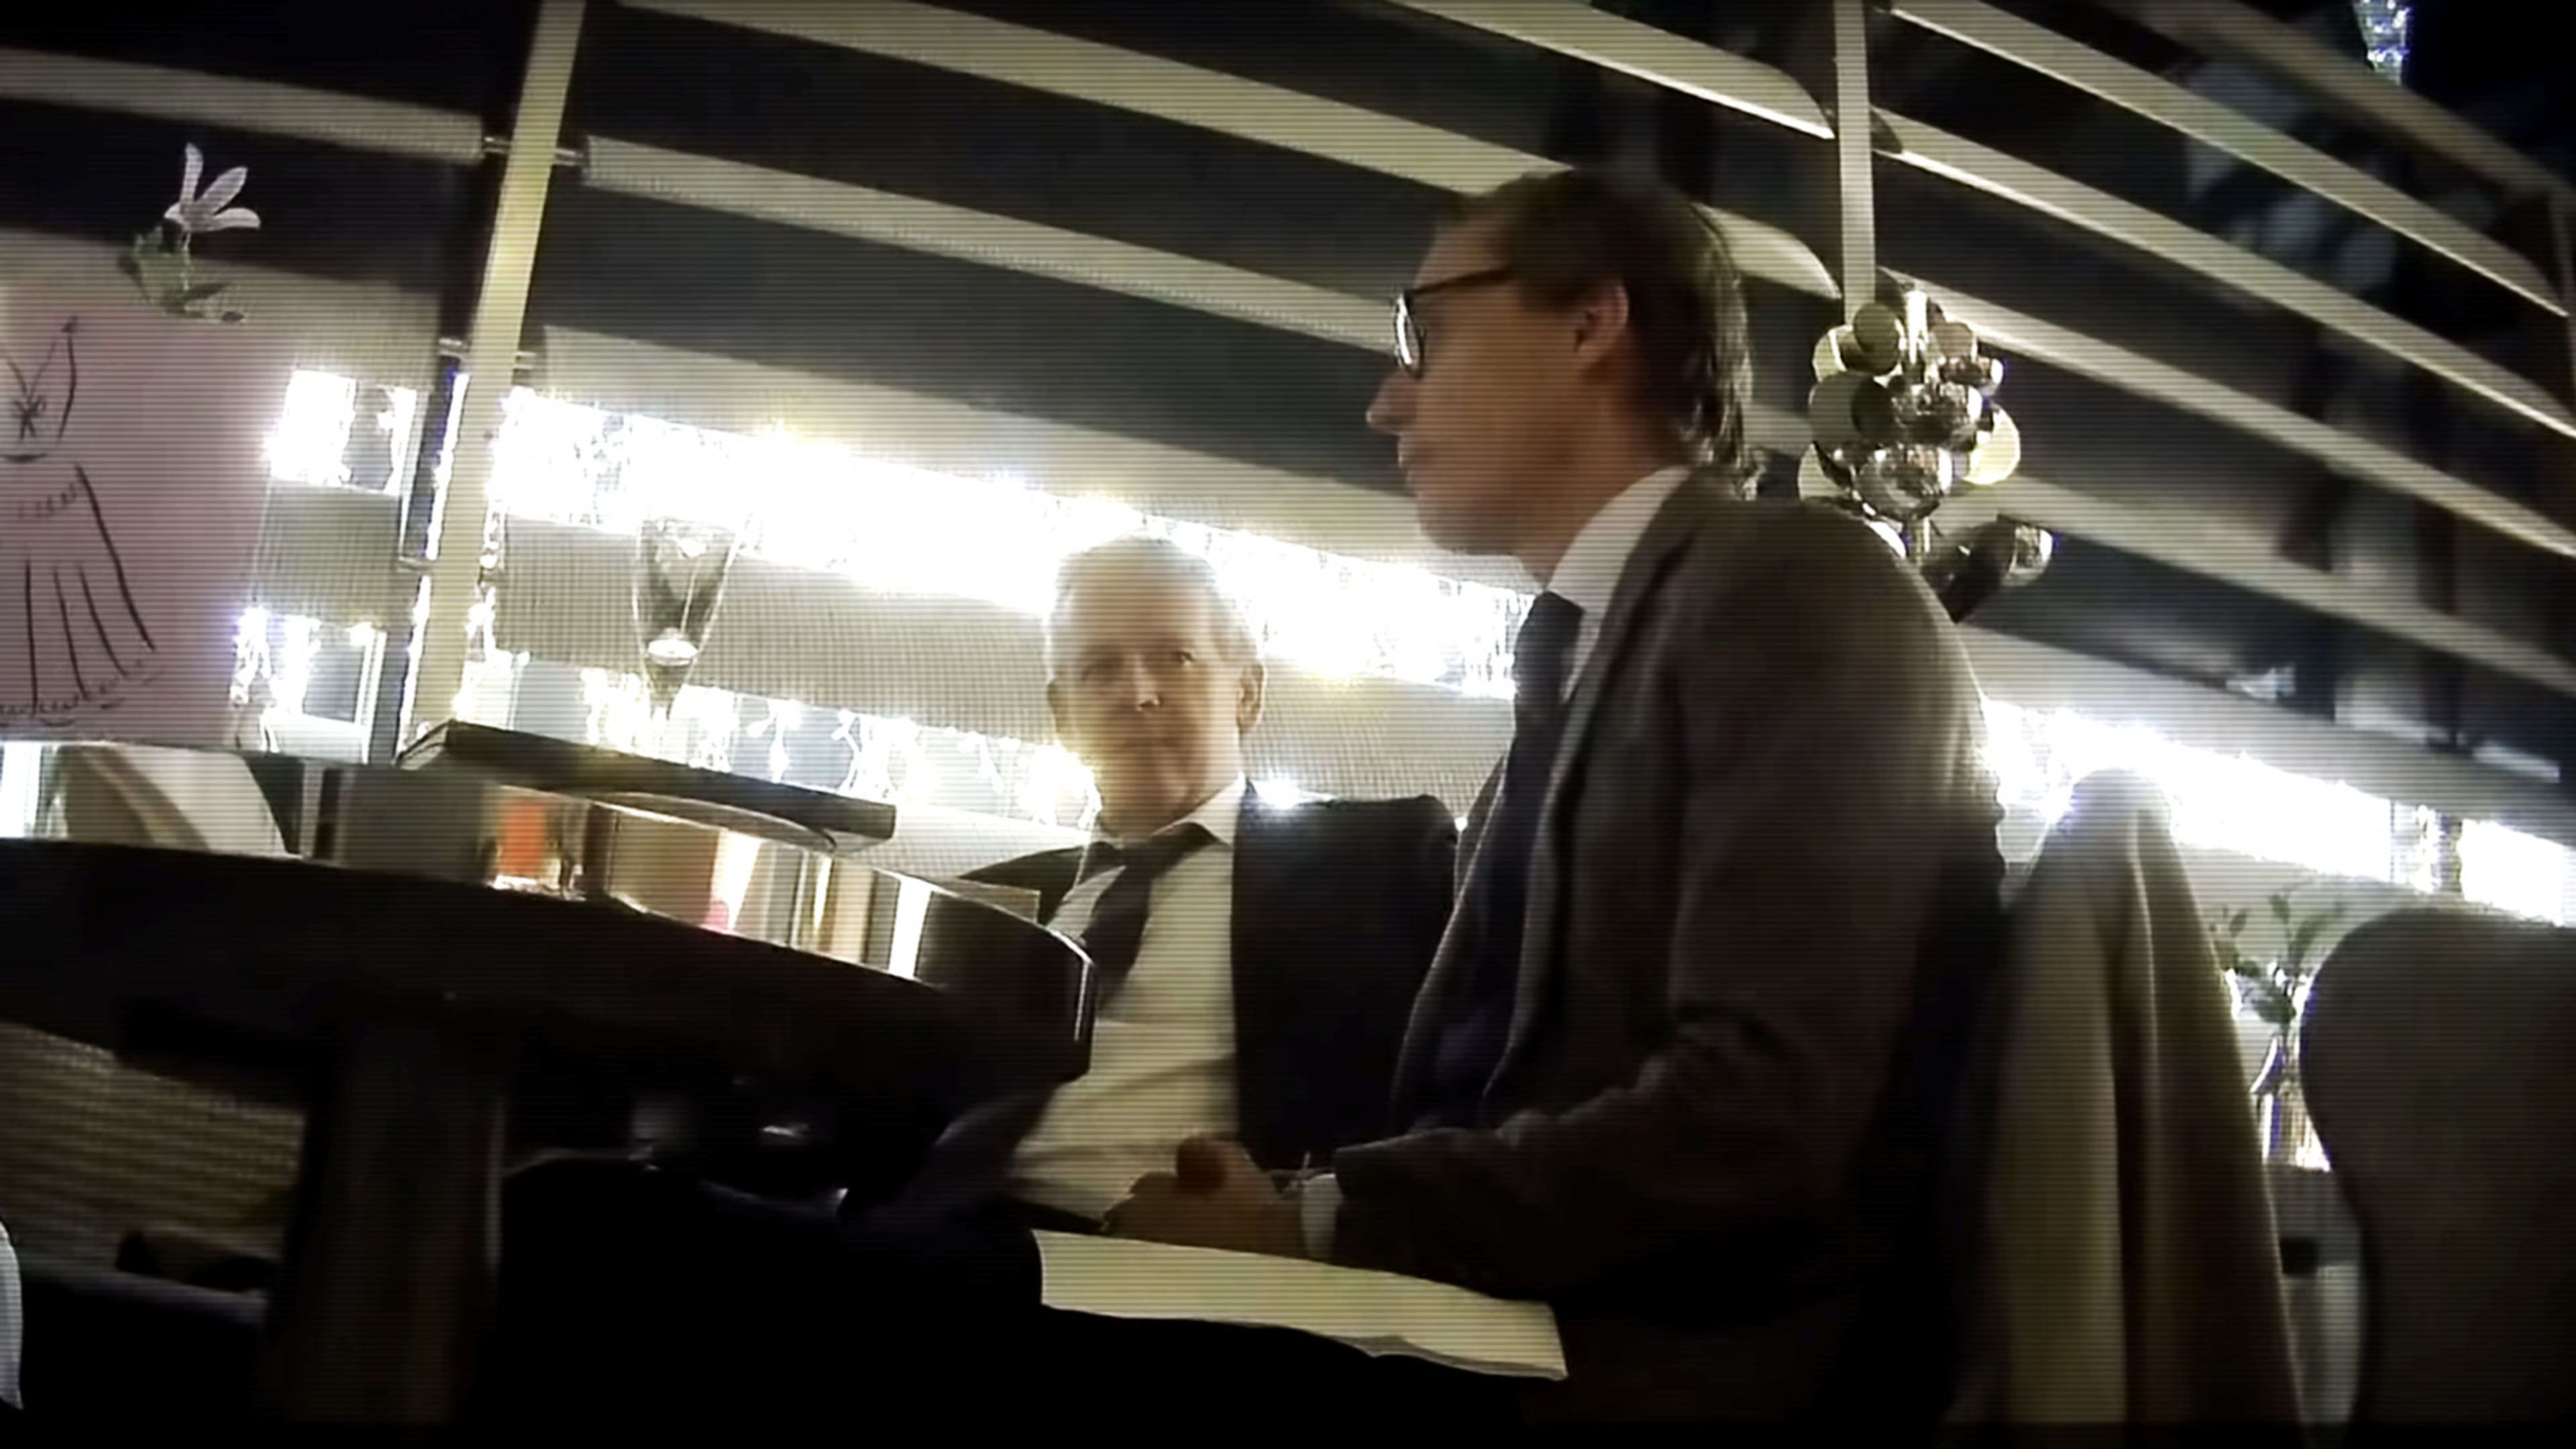 Caught On Tape, Cambridge Analytica Execs Offered To Extort Political Foes And Spread Lies